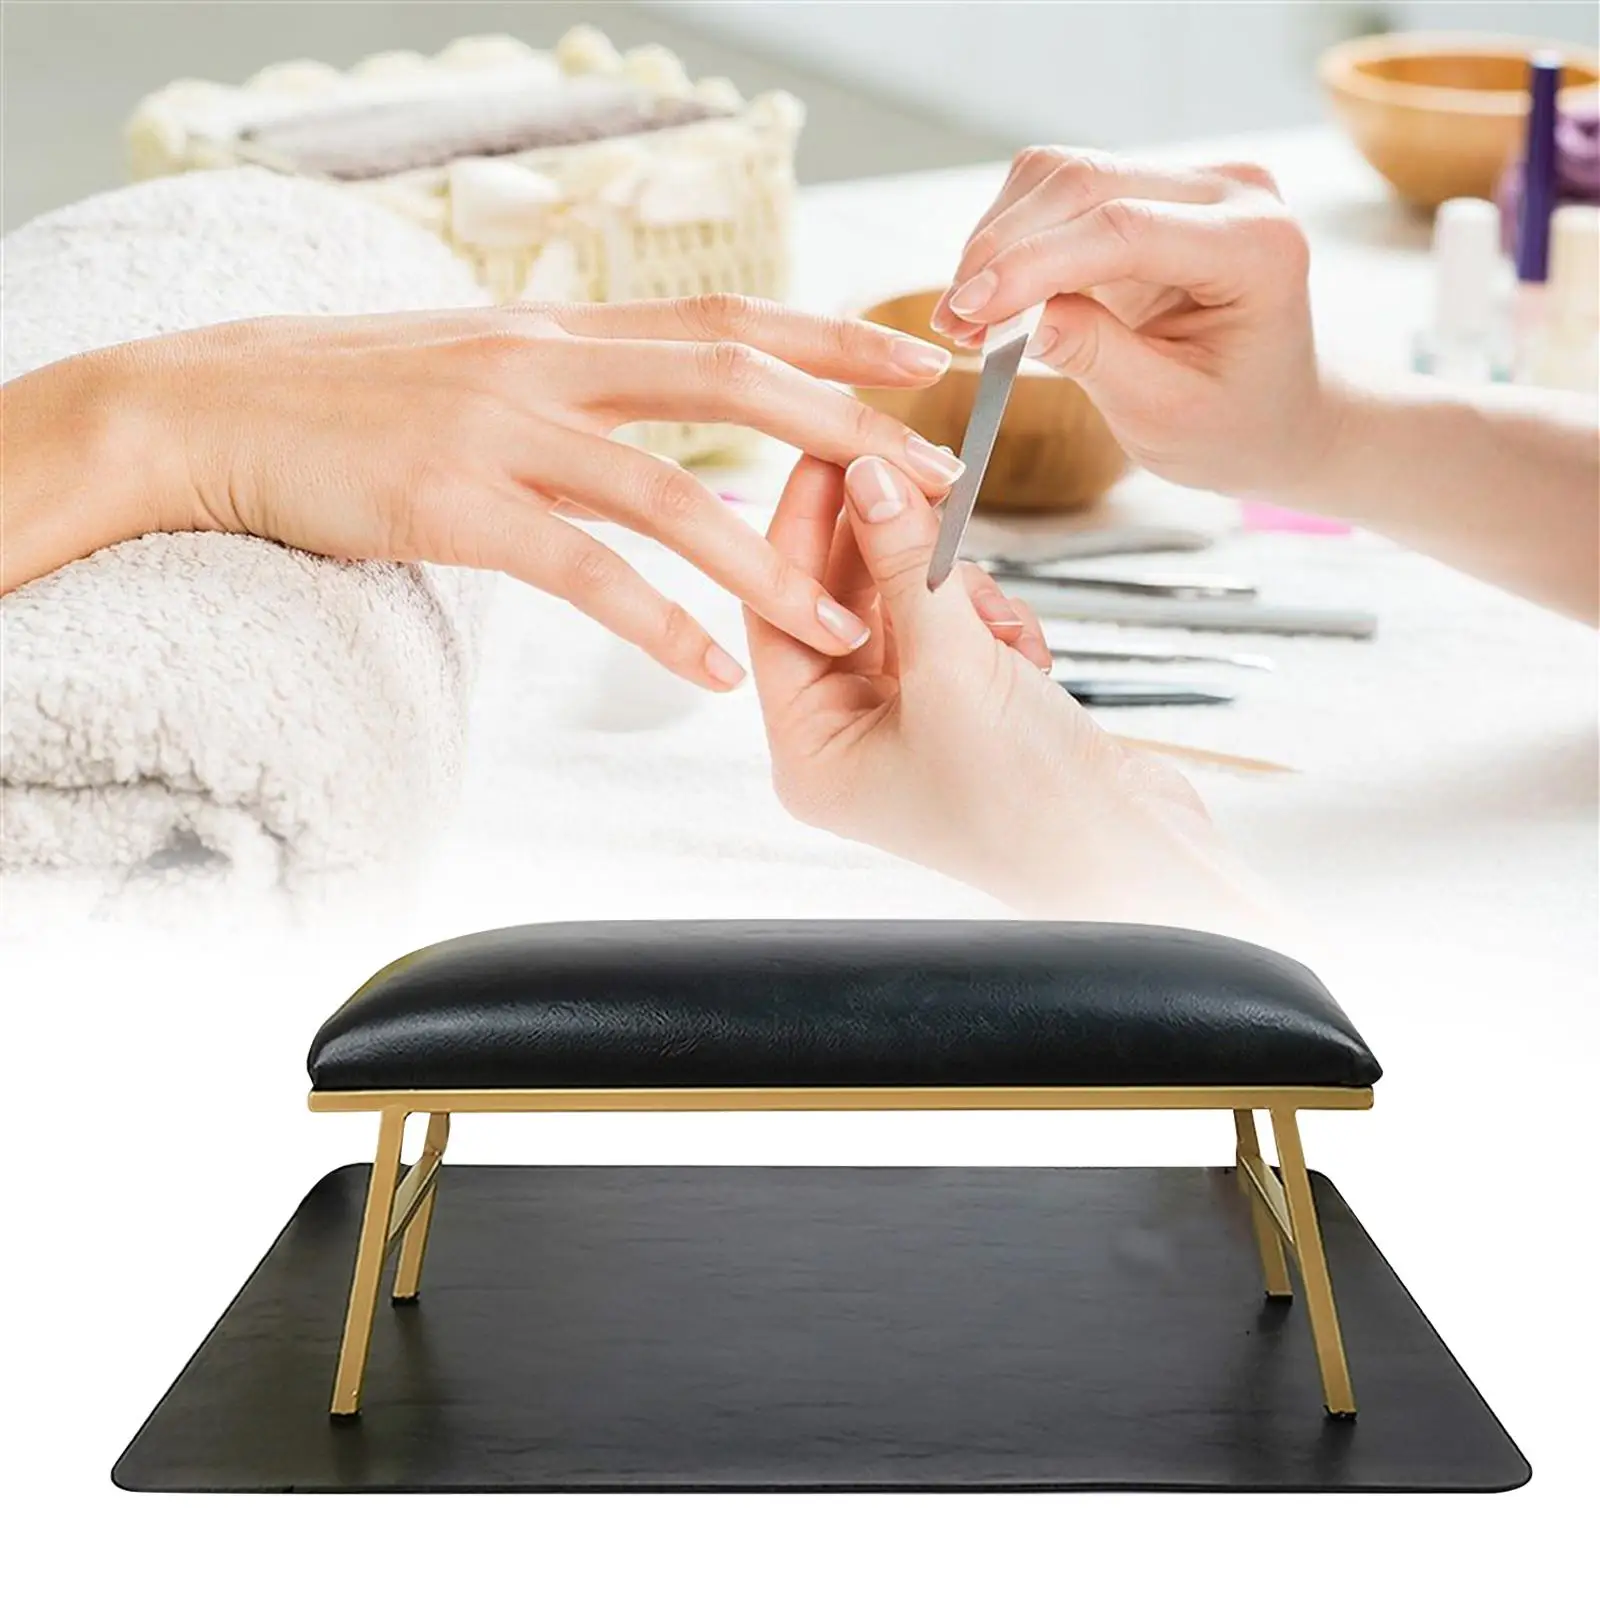 Nail Hand Pillow and Table Mat Set PU Leather Professional Comfortable Desk Nail Arm Rest Cushion Hand Cushion for Home Arm Nail